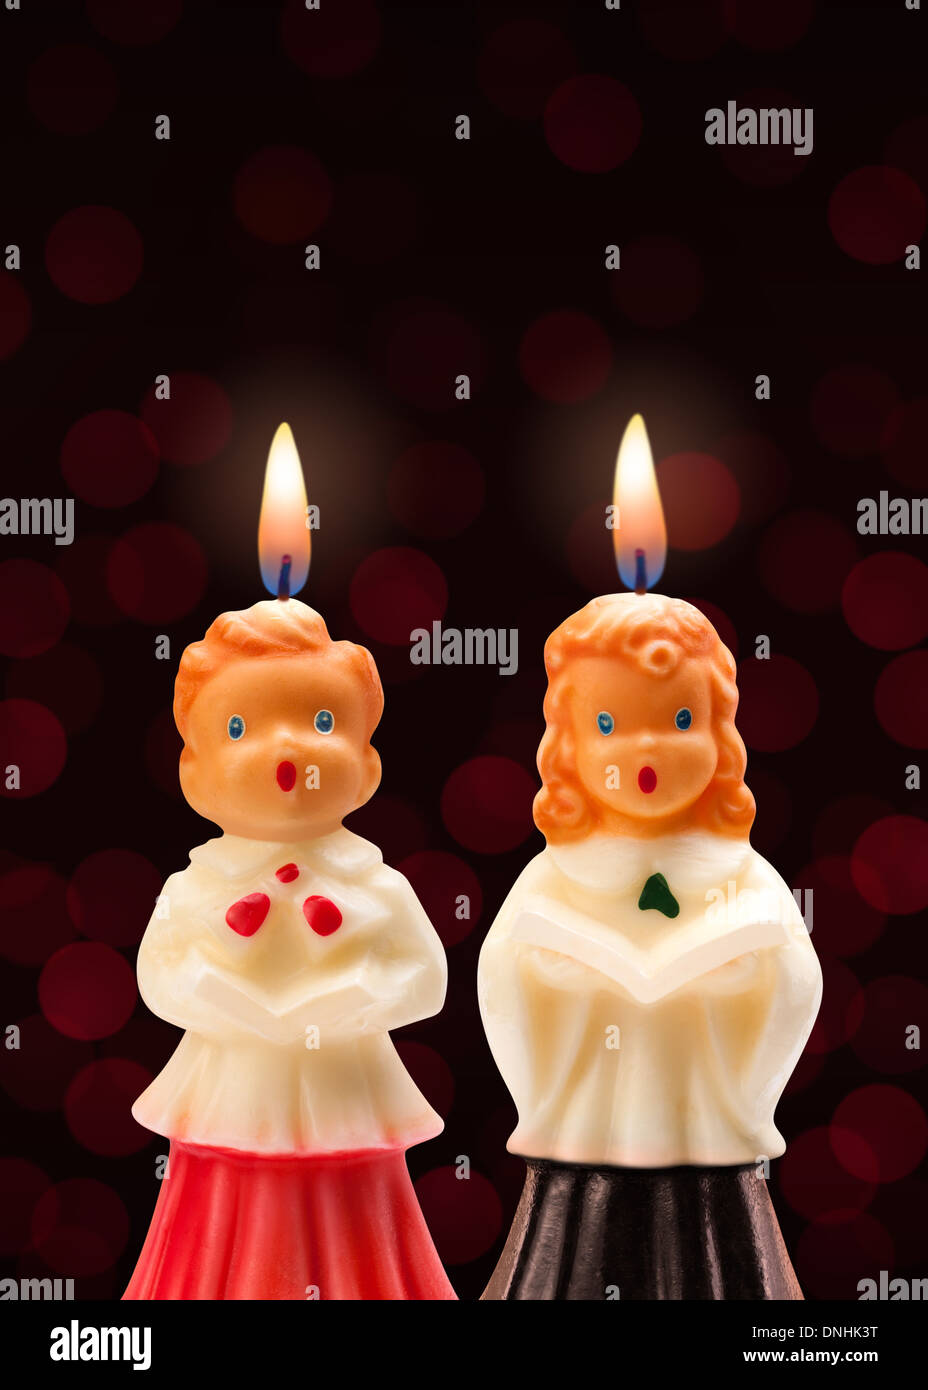 Choir Boy and Girl Candles isolated on a dark background. Stock Photo